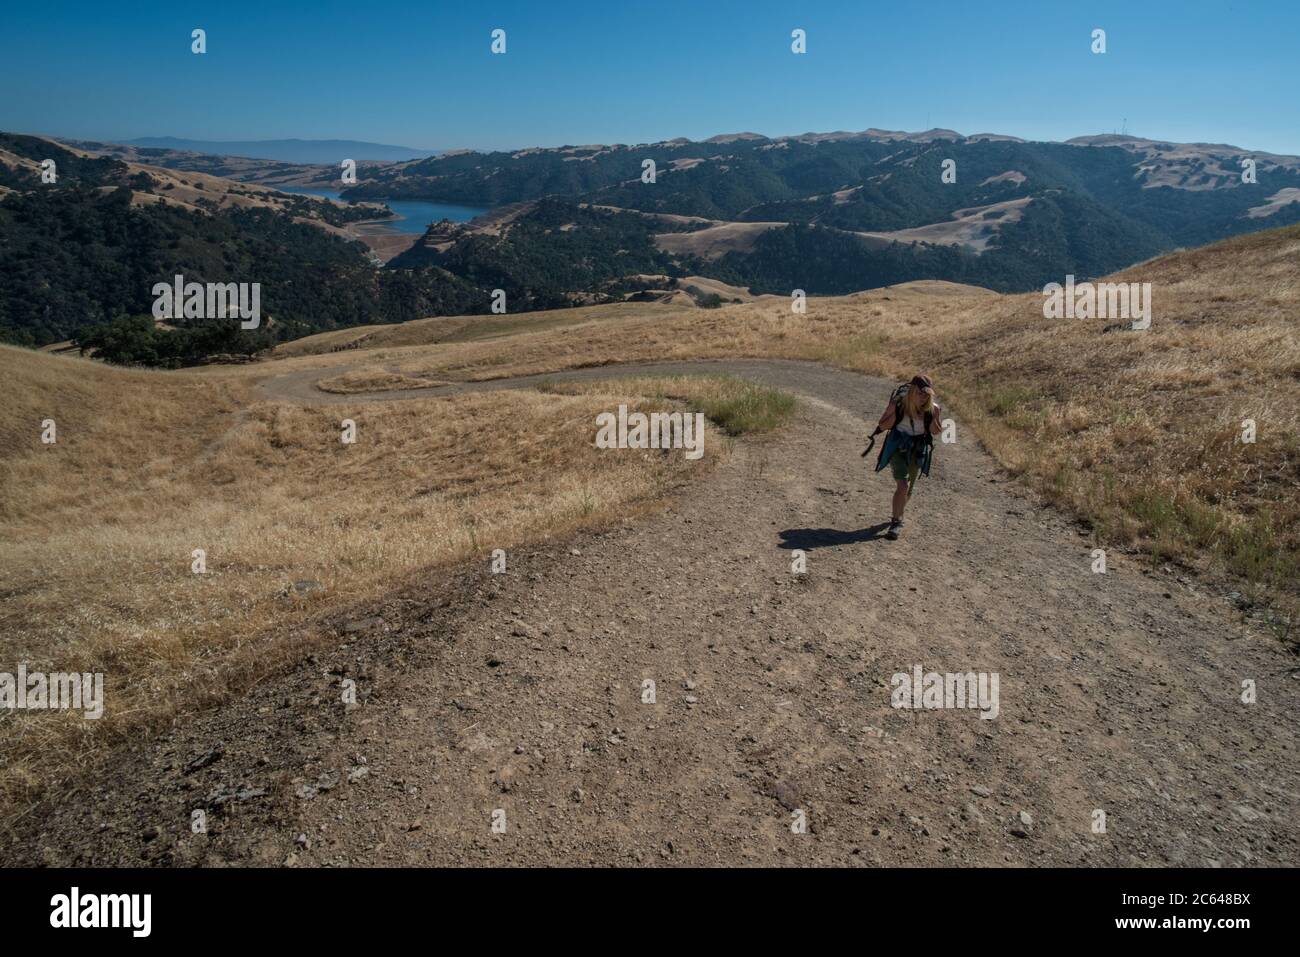 A single person walks uphill along a dirt road in Sunol wilderness in Alameda county, California. Stock Photo